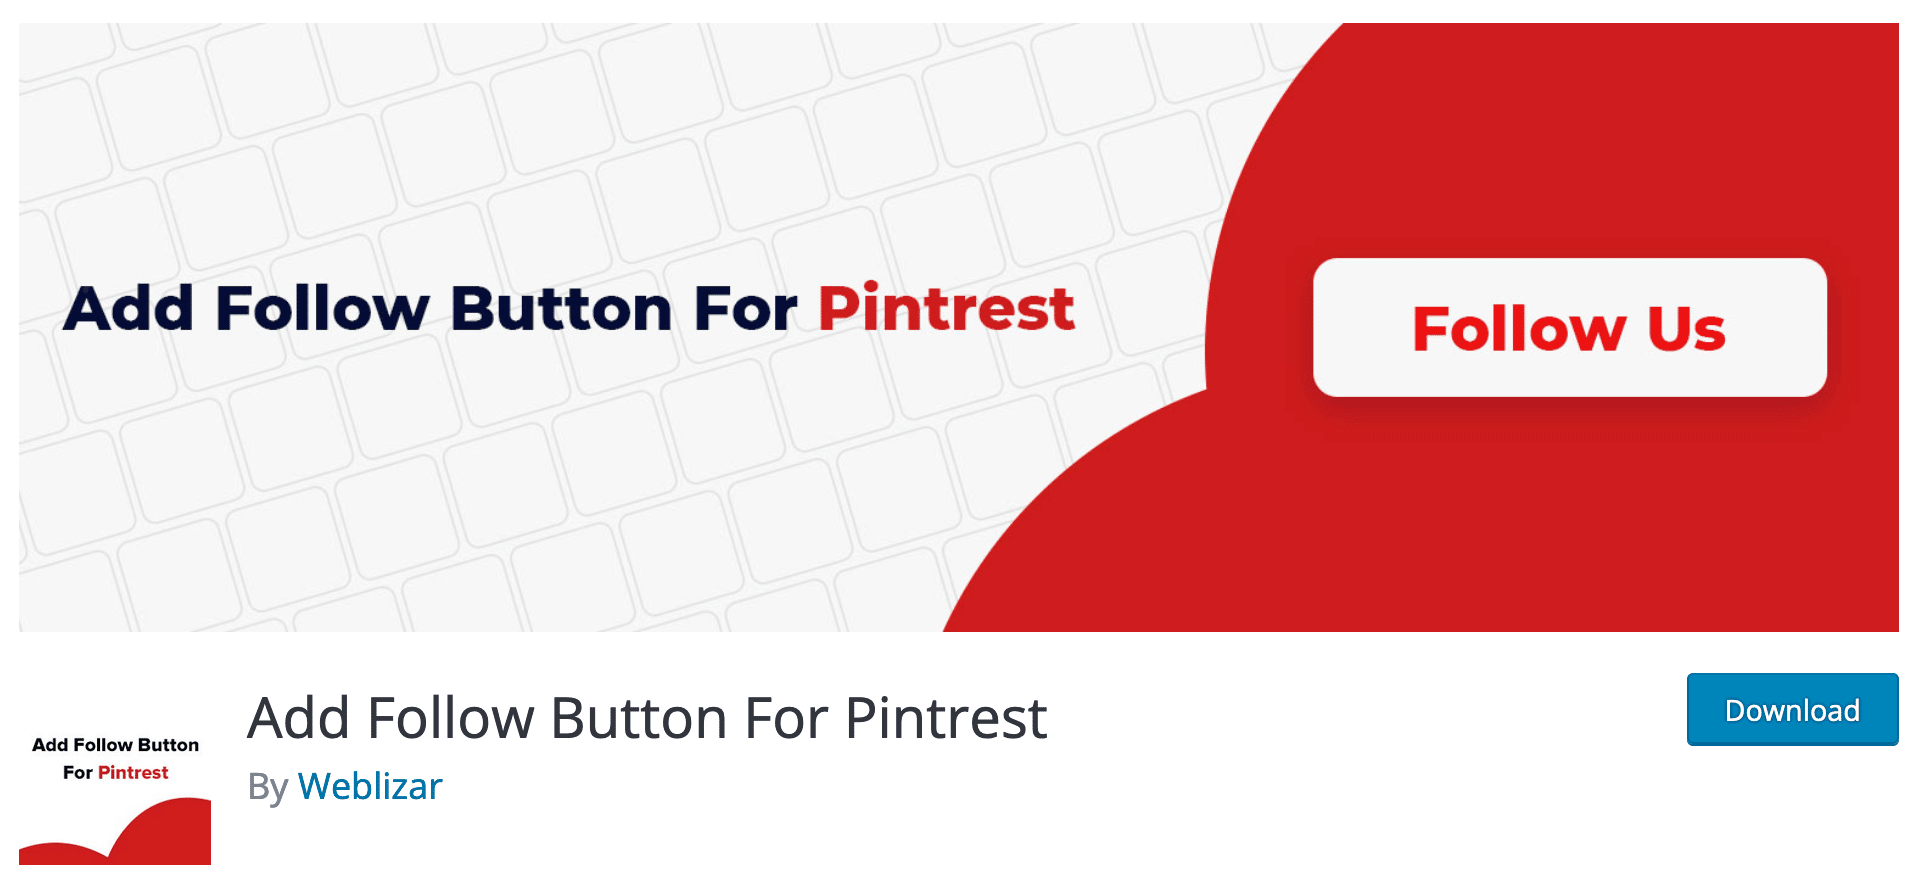 Add Follow Button For Pintrest plugin download page.